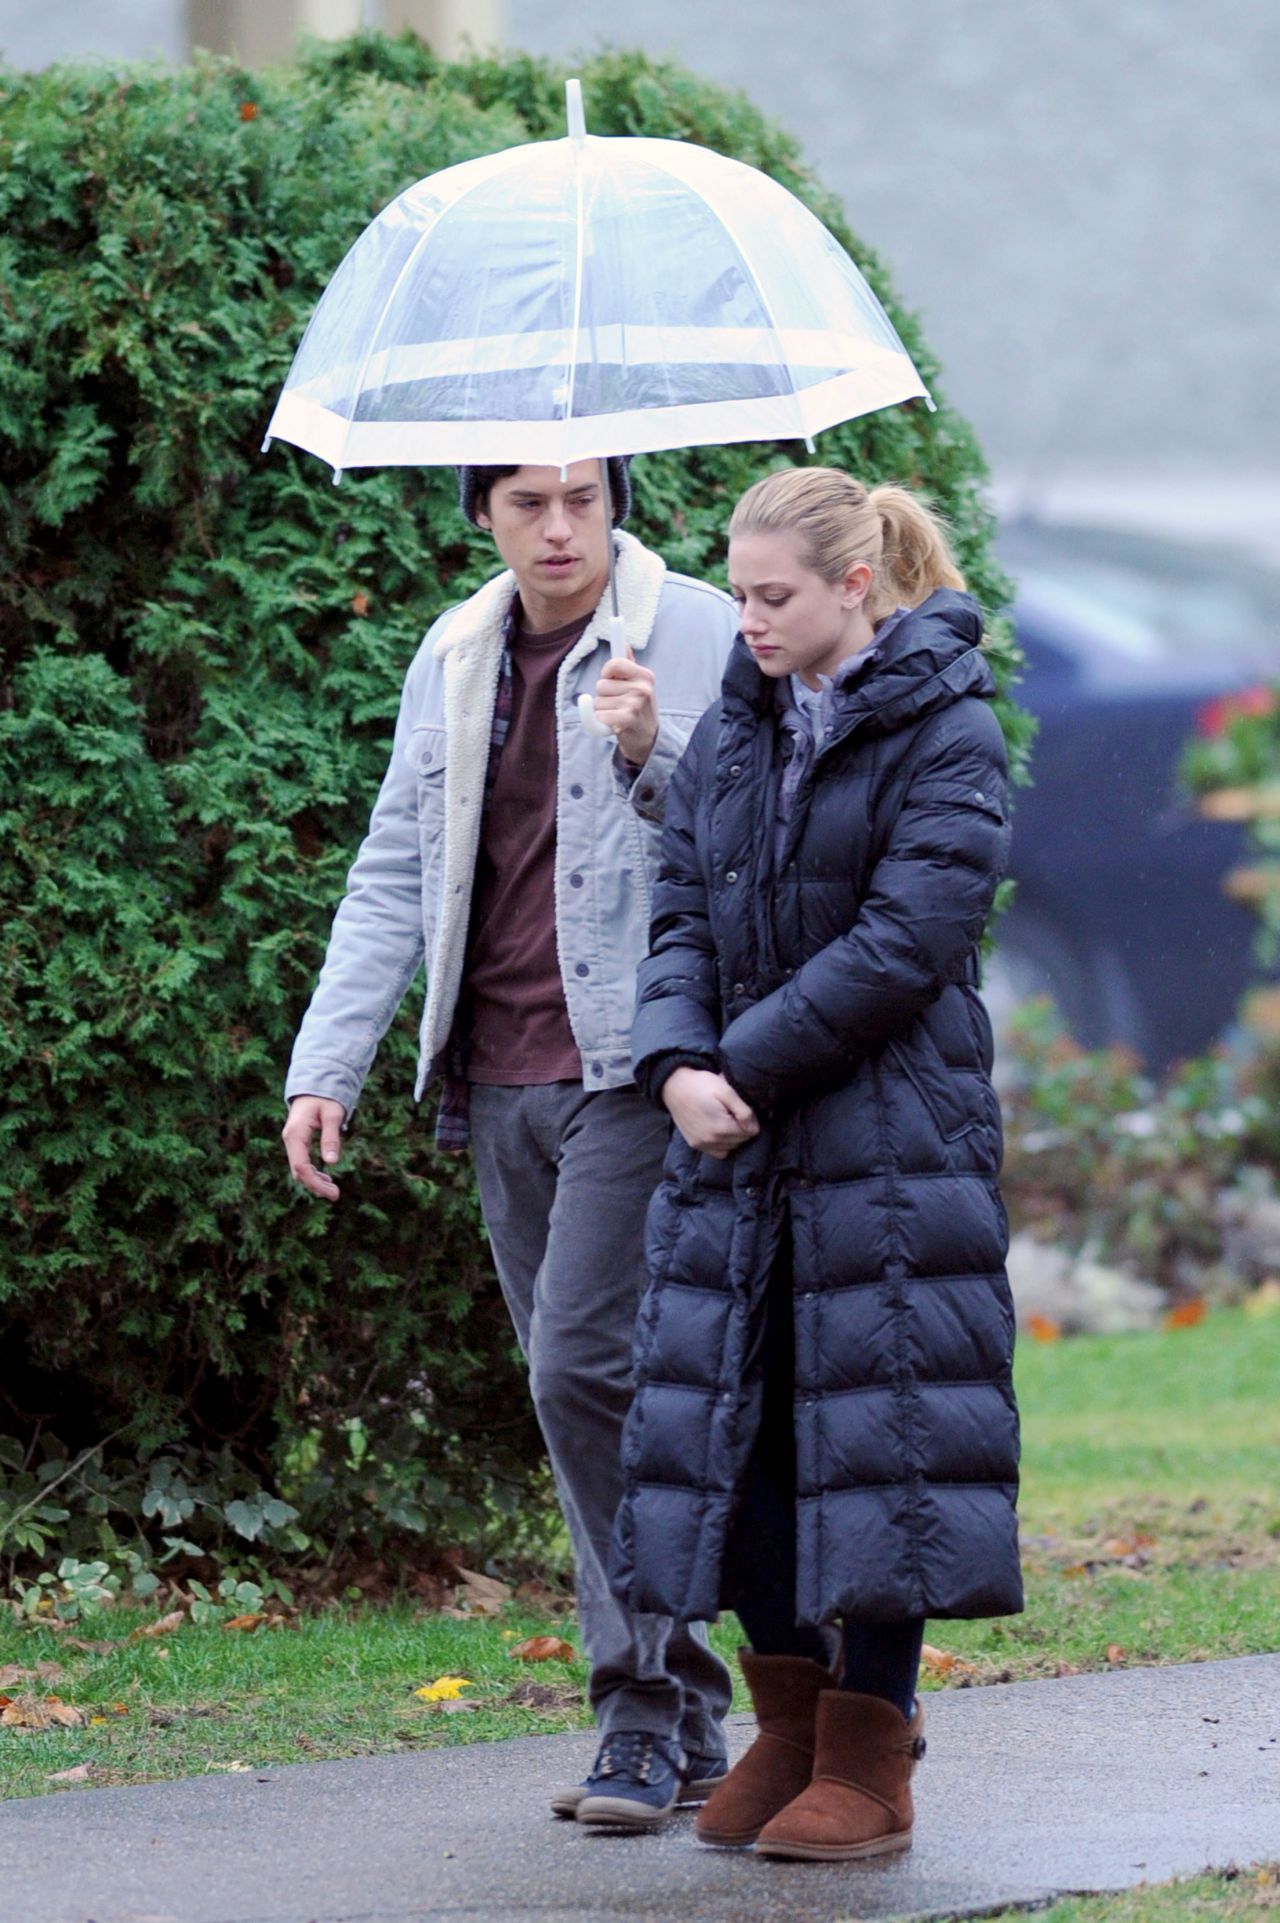 lili-reinhart-and-cole-sprouse-filming-an-episode-of-riverdale-in-vancouver-11-14-2017-3.jpg